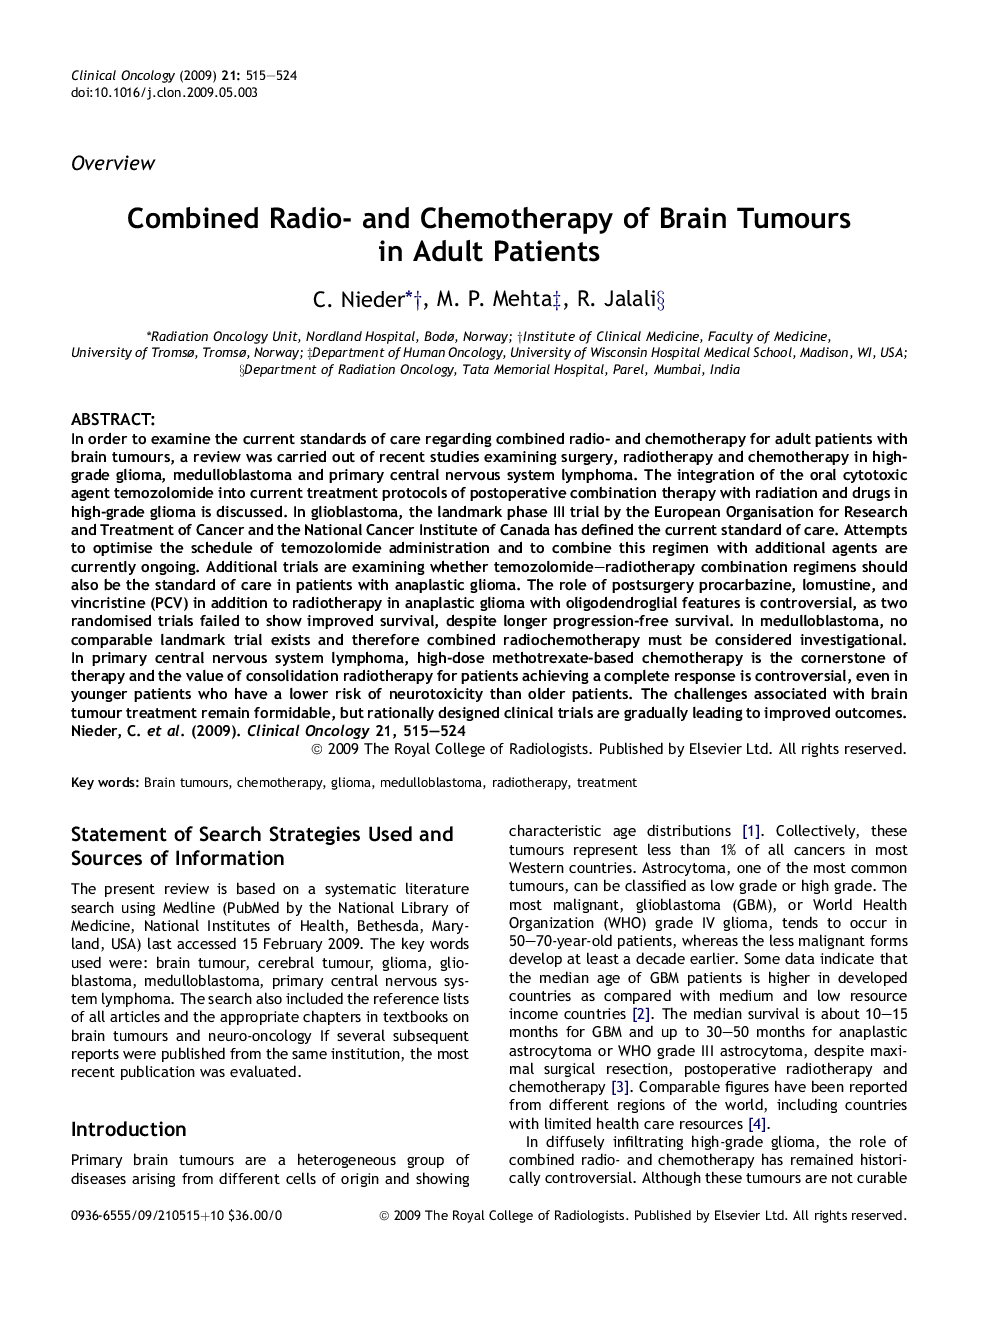 Combined Radio- and Chemotherapy of Brain Tumours in Adult Patients